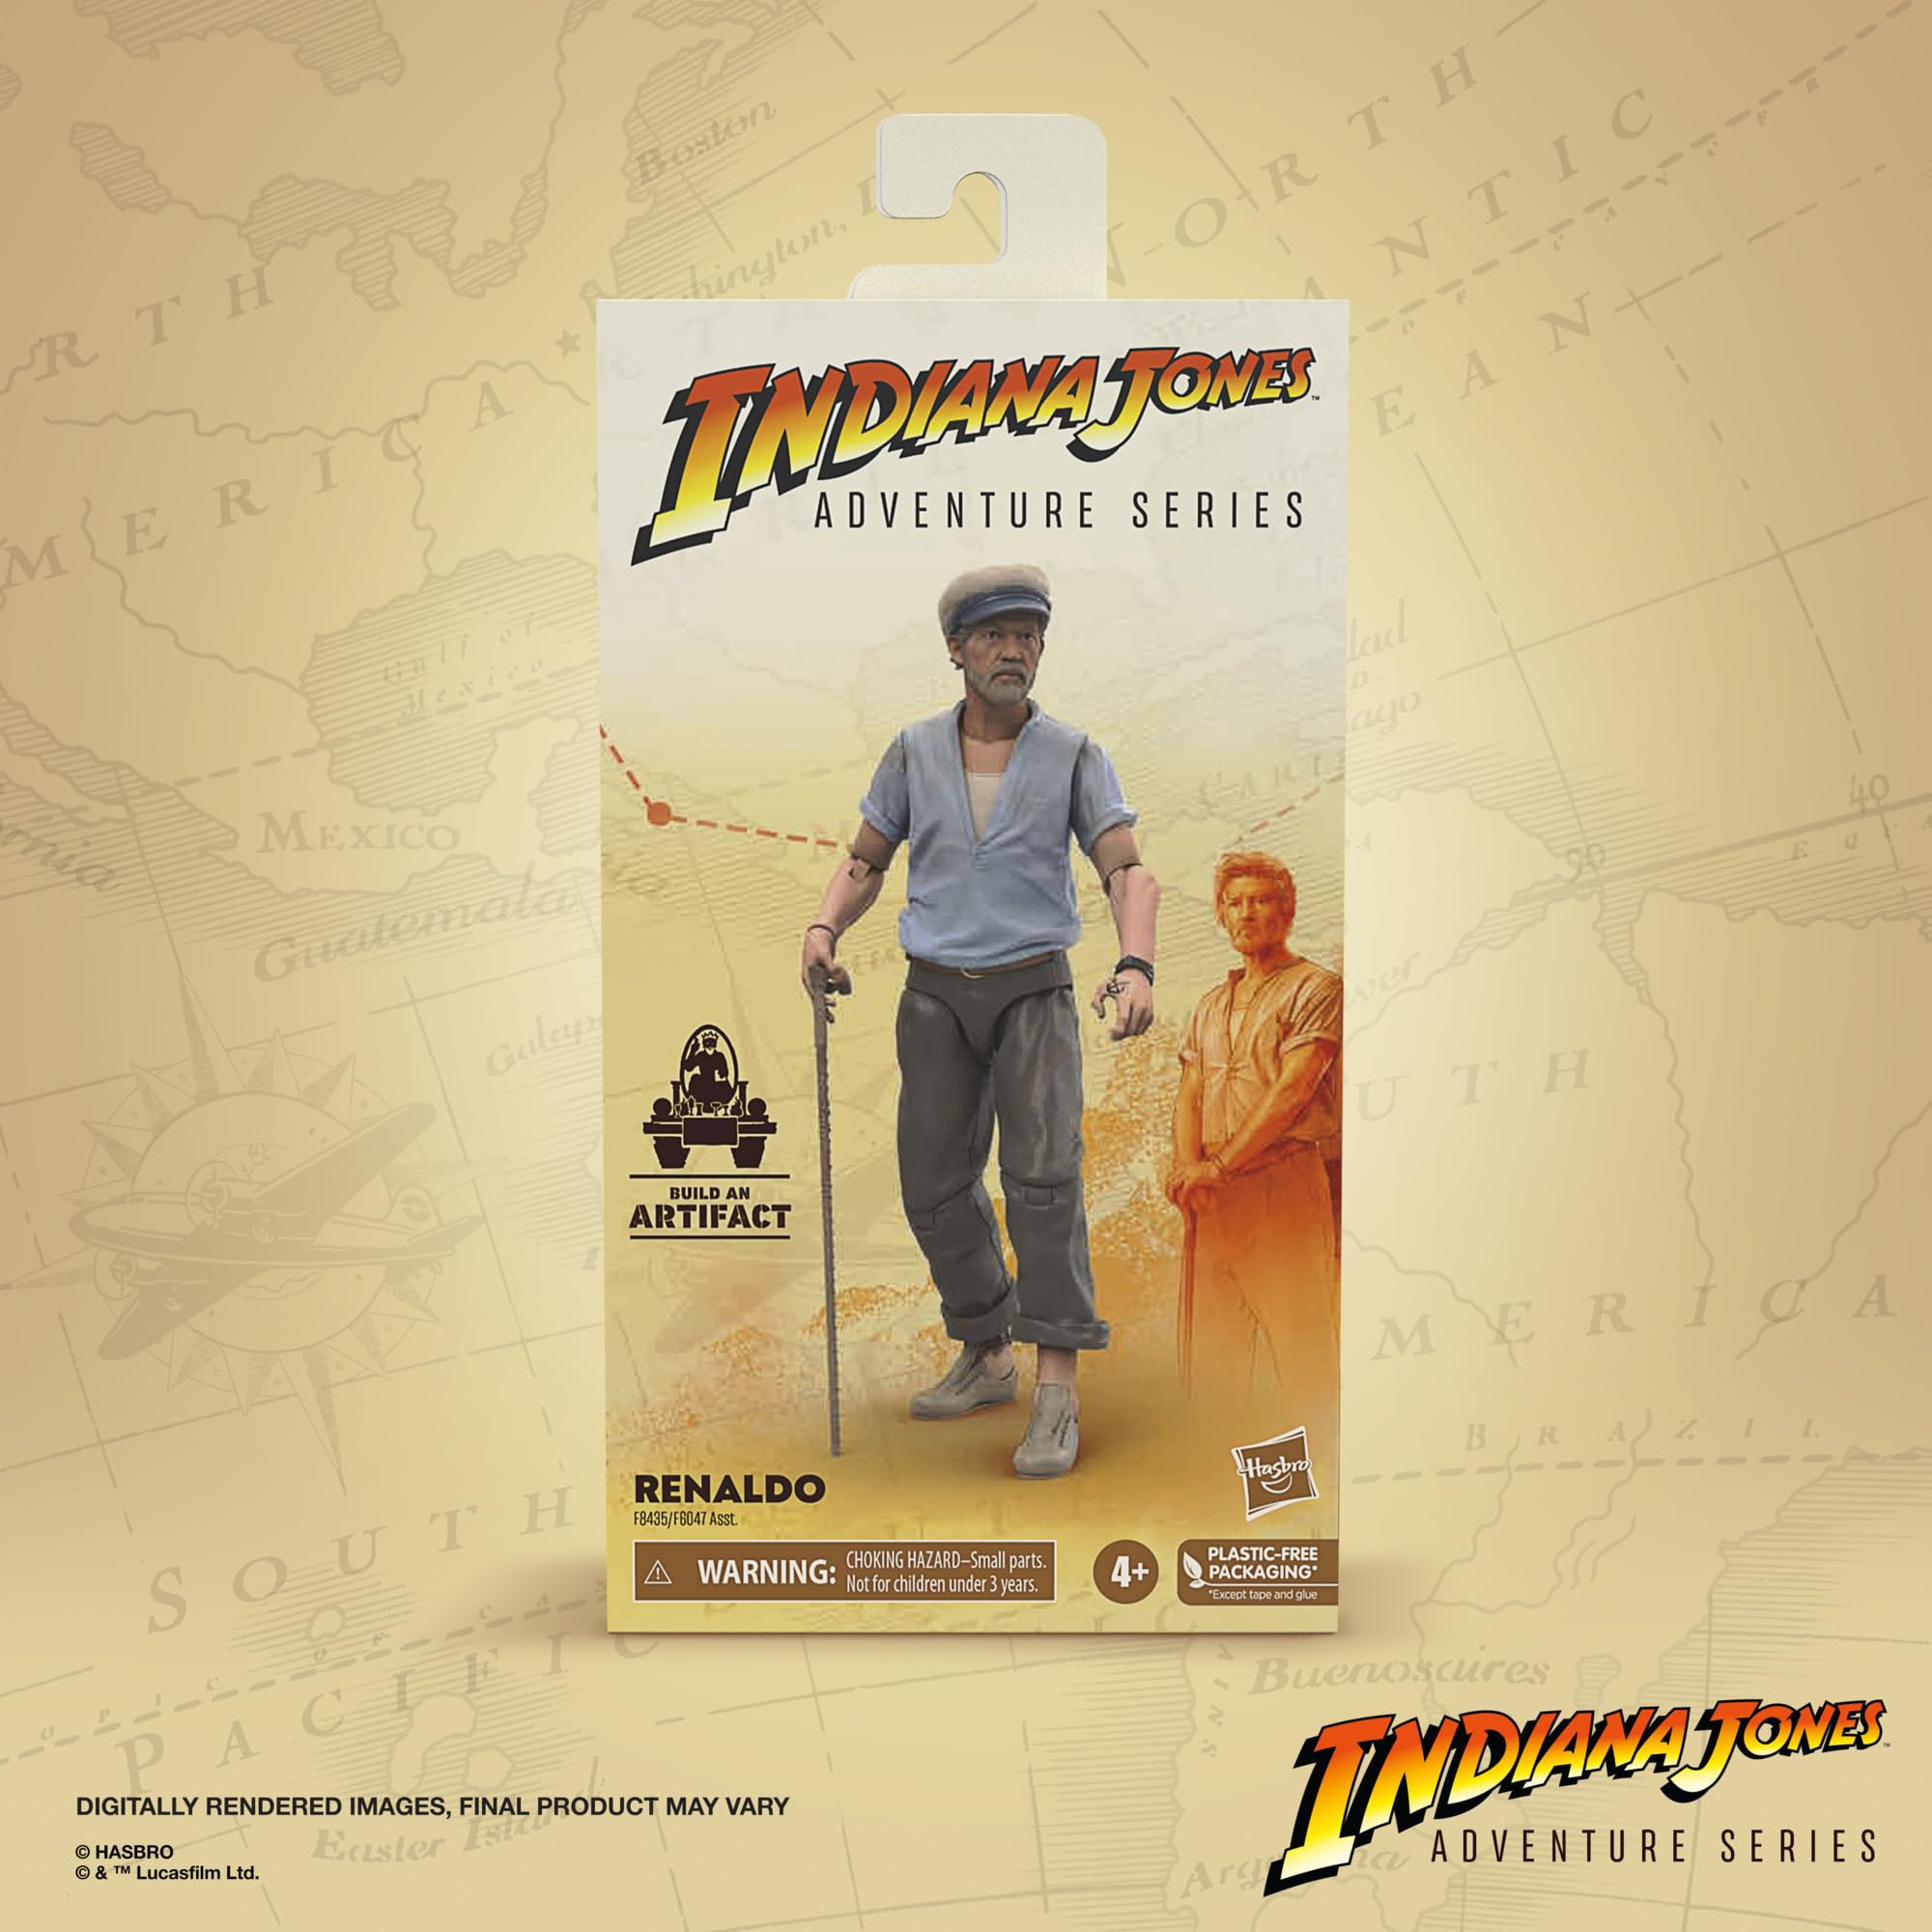 Indiana Jones and the Dial of Destiny Adventure Series Renaldo Action Figure, 6-inch Indiana Jones Action Figures, Toys for Kids Ages 4 and up